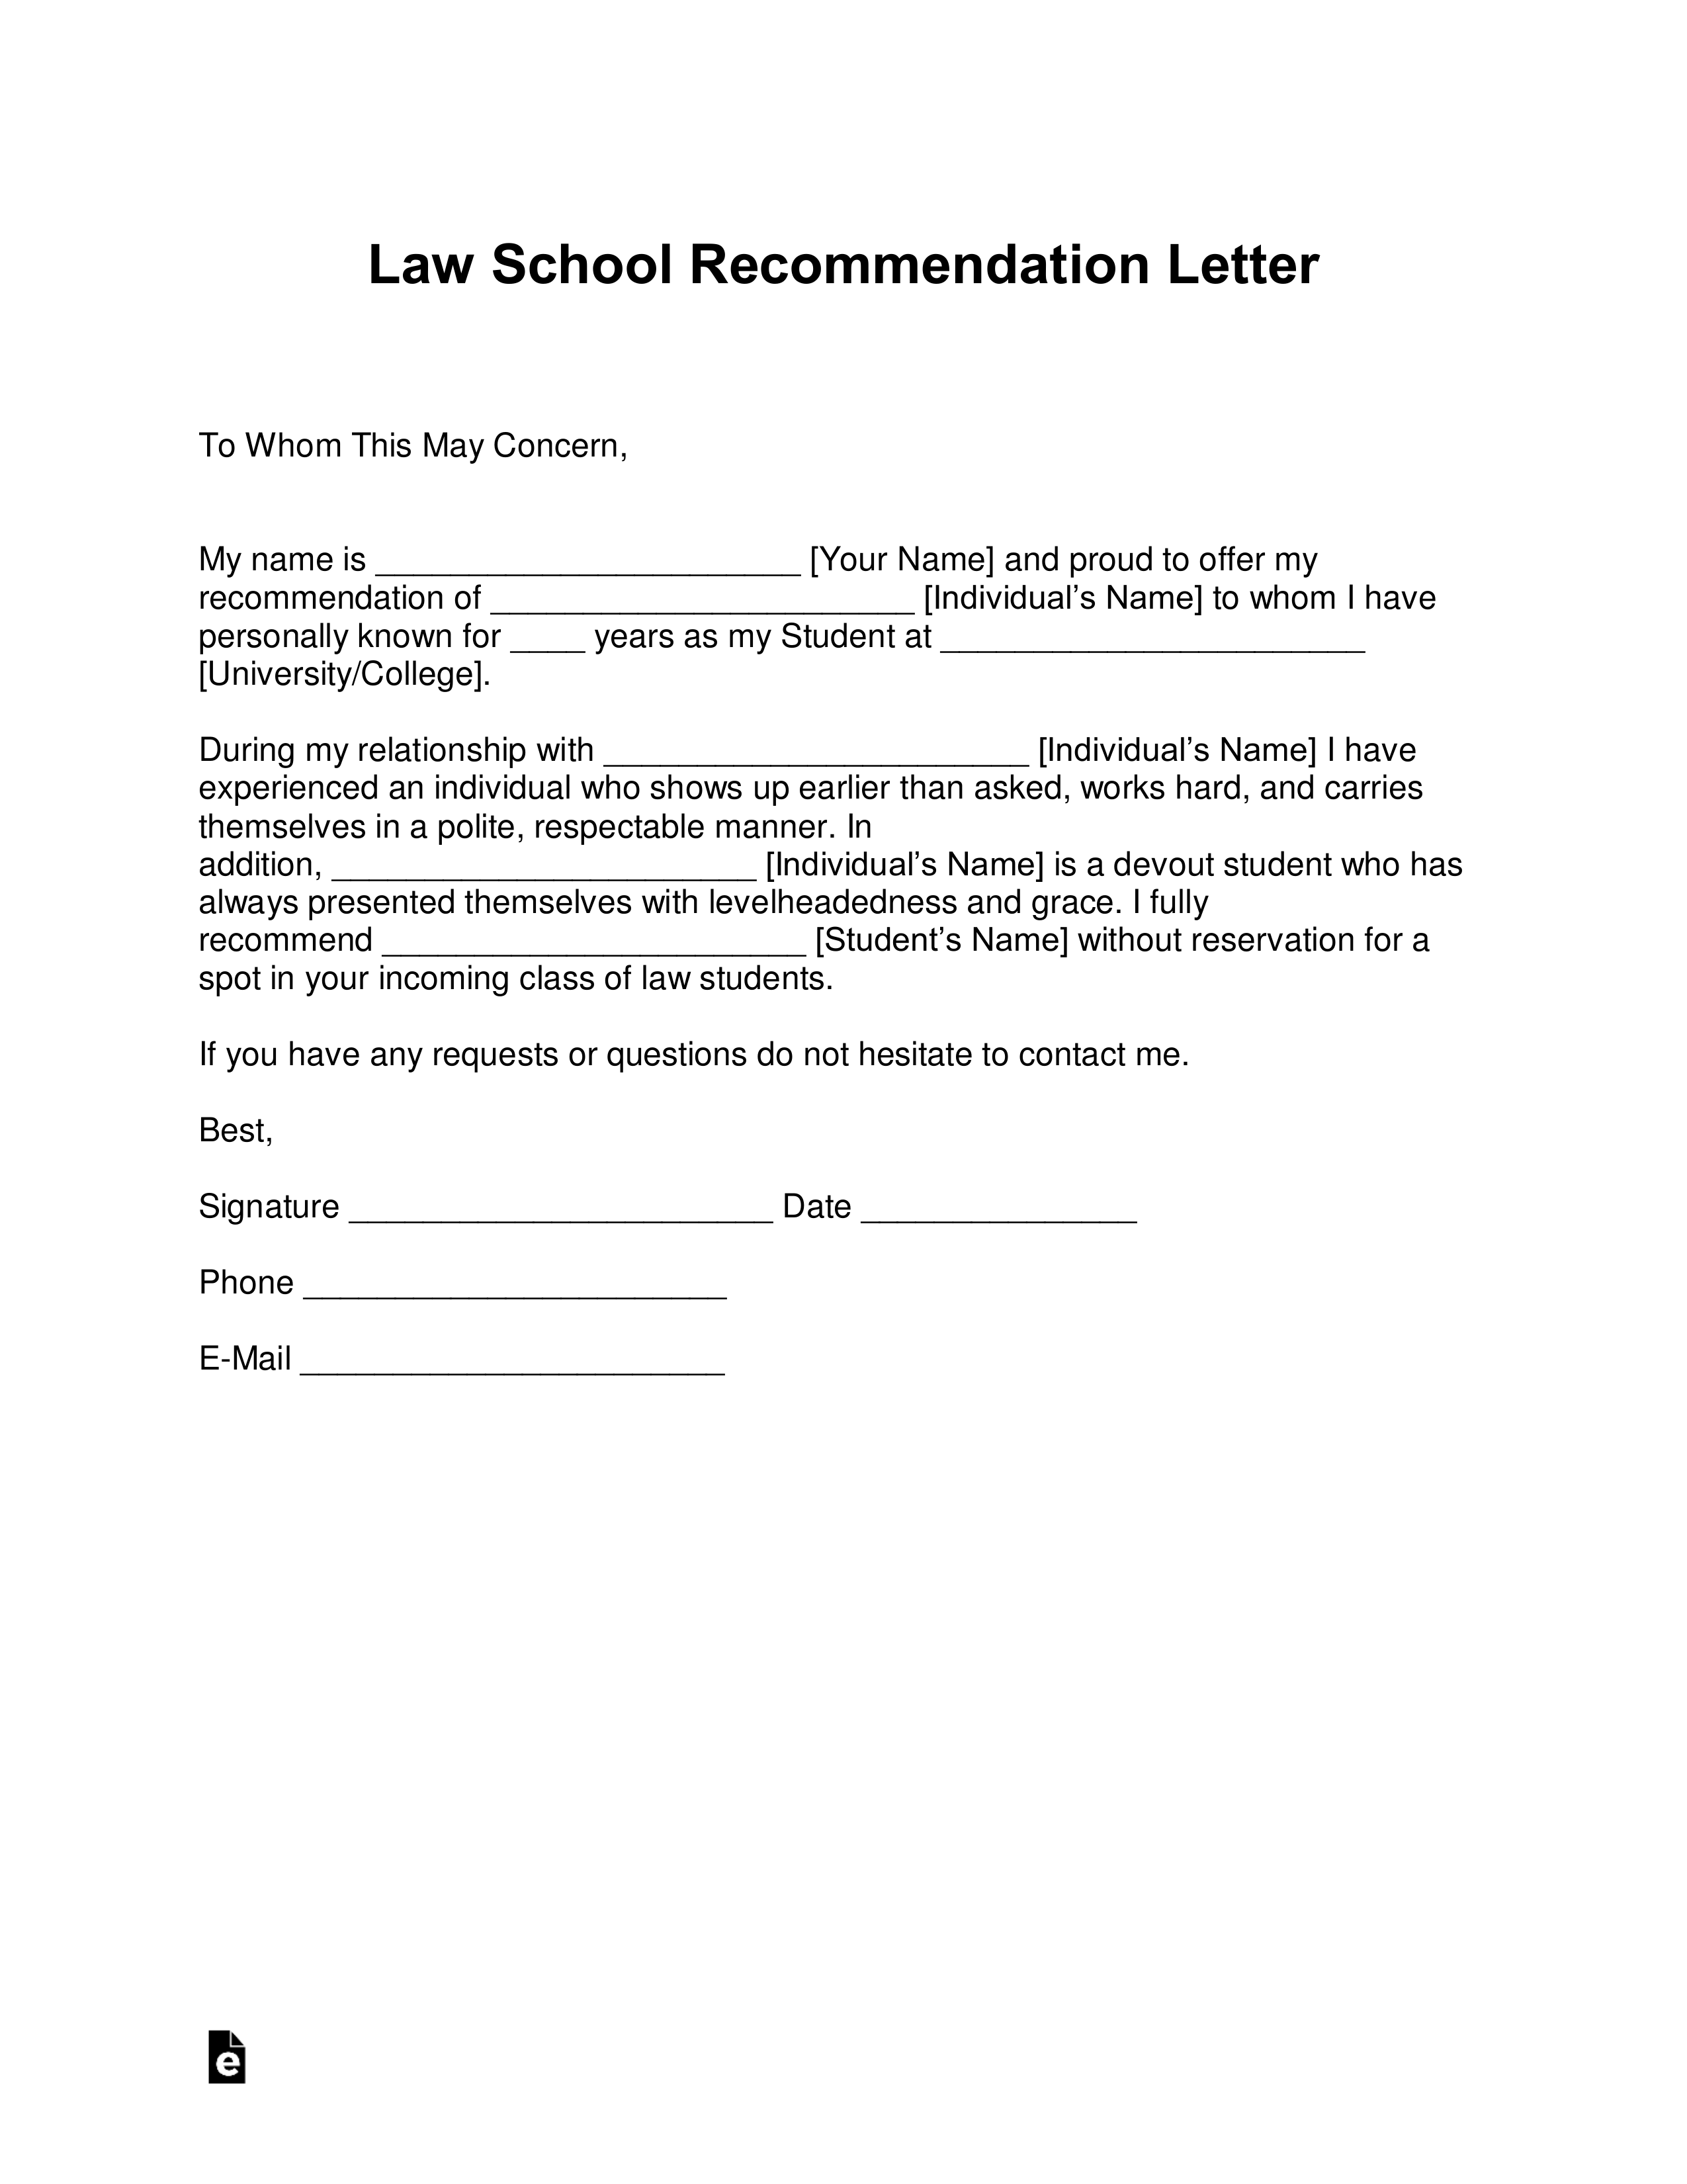 Sample Letter Of Recommendation For College Faculty Position from eforms.com